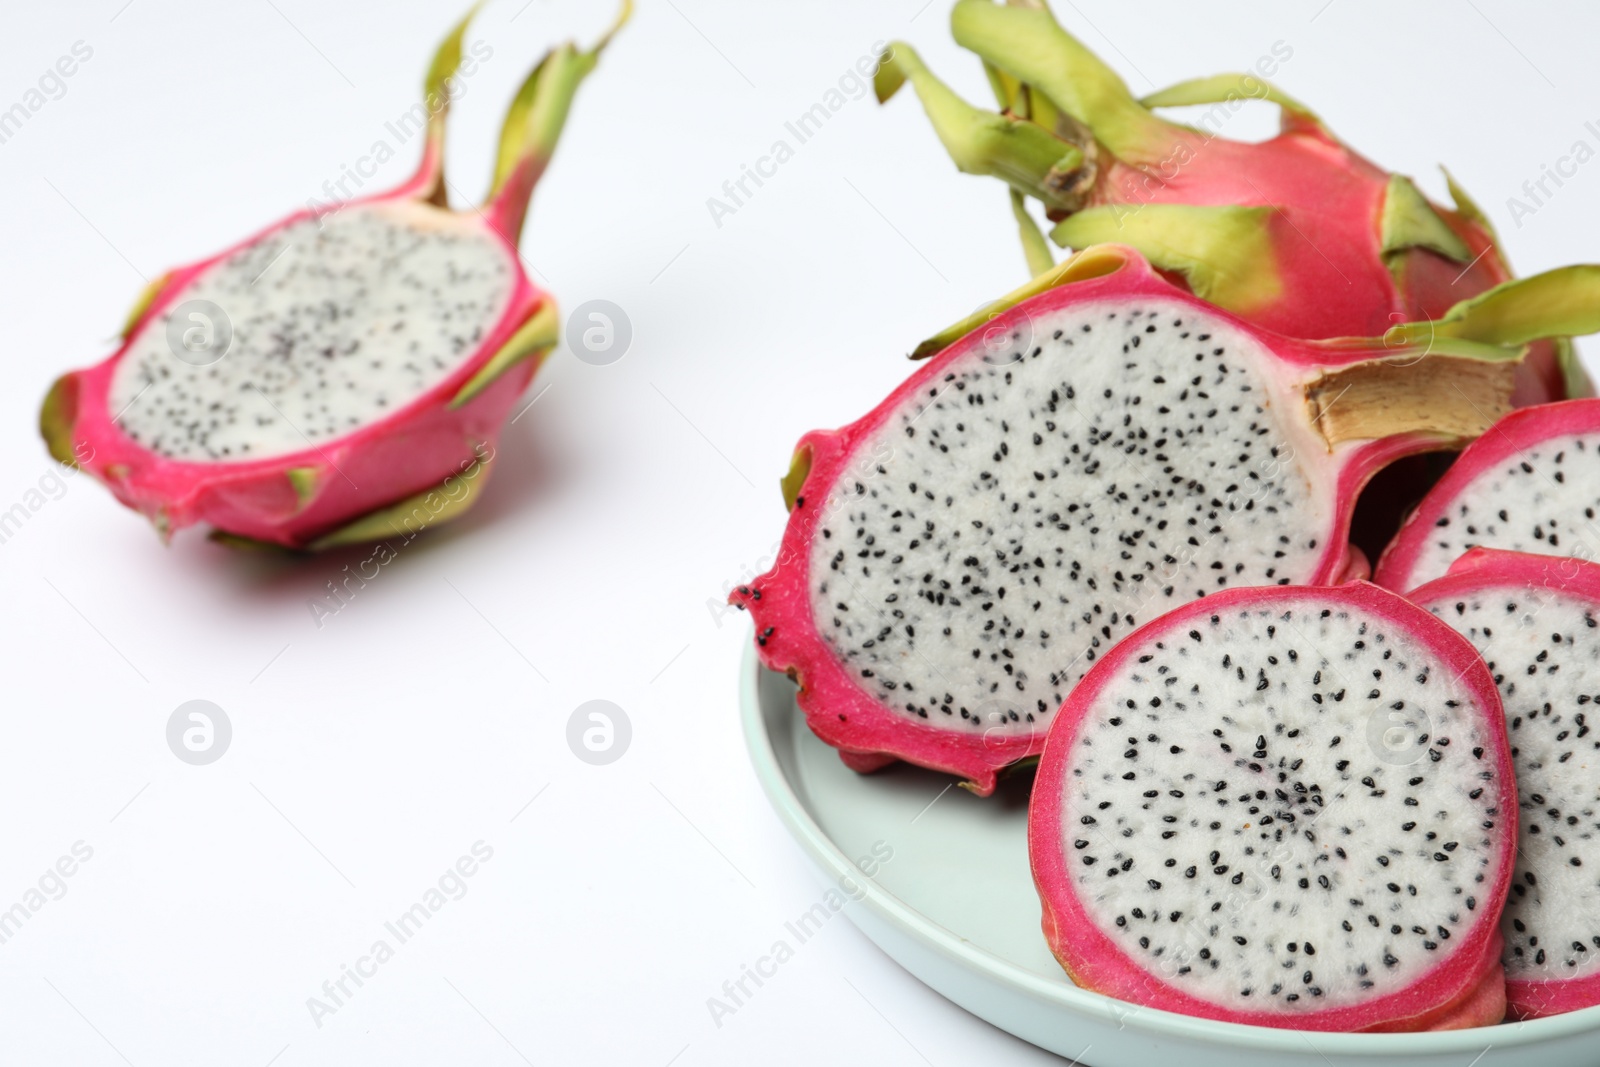 Photo of Delicious cut and whole dragon fruits (pitahaya) on white background